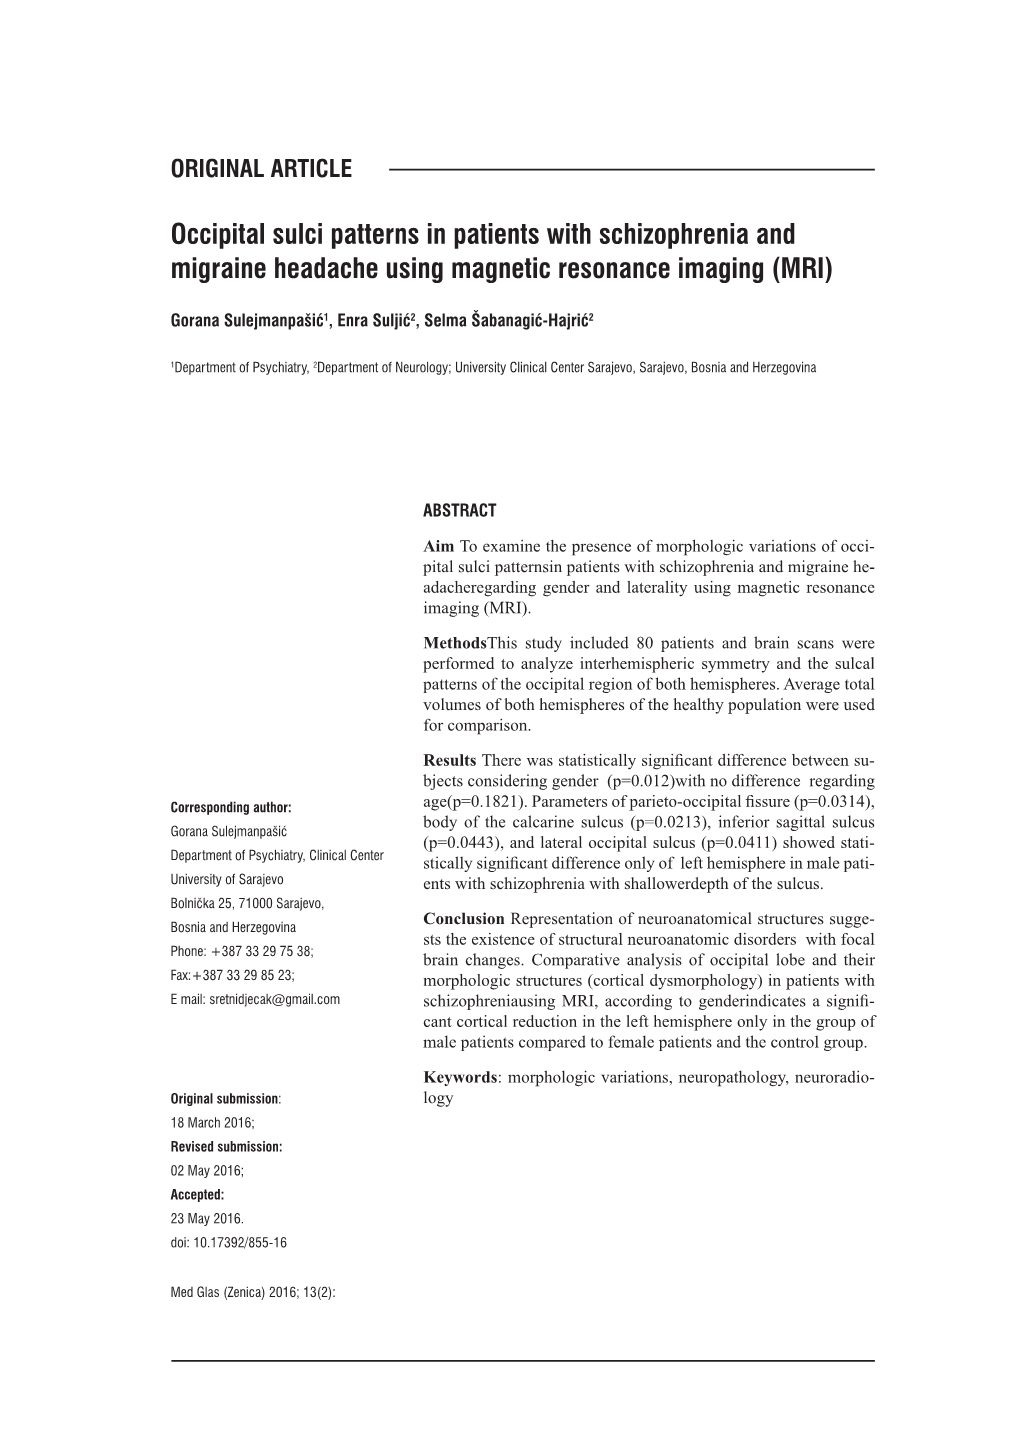 Occipital Sulci Patterns in Patients with Schizophrenia and Migraine Headache Using Magnetic Resonance Imaging (MRI)